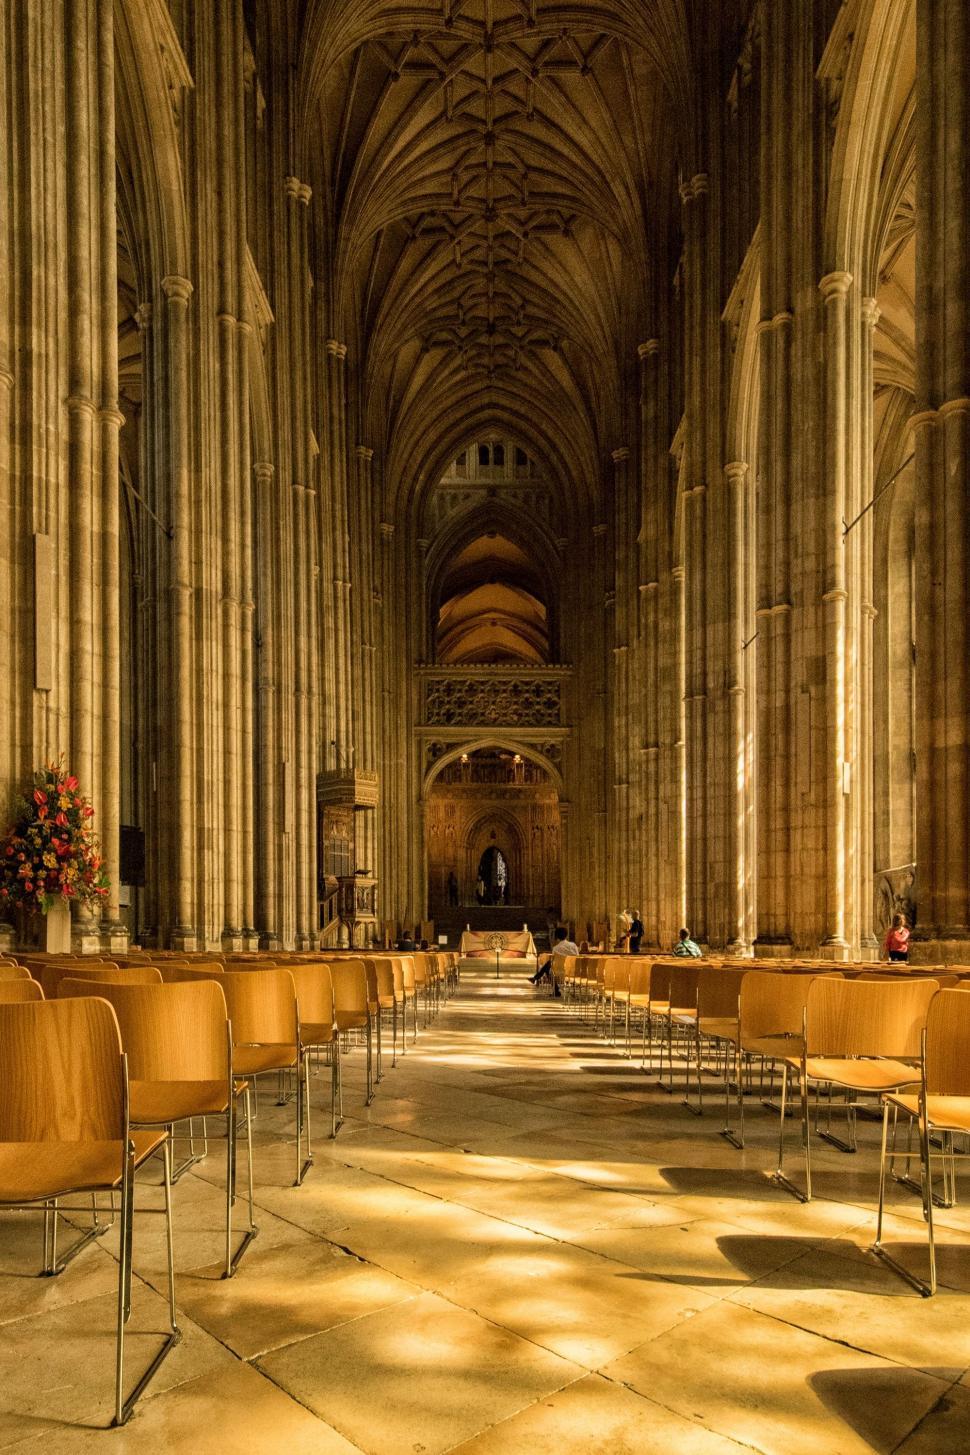 Free Image of Cathedral Filled With Brown Chairs 